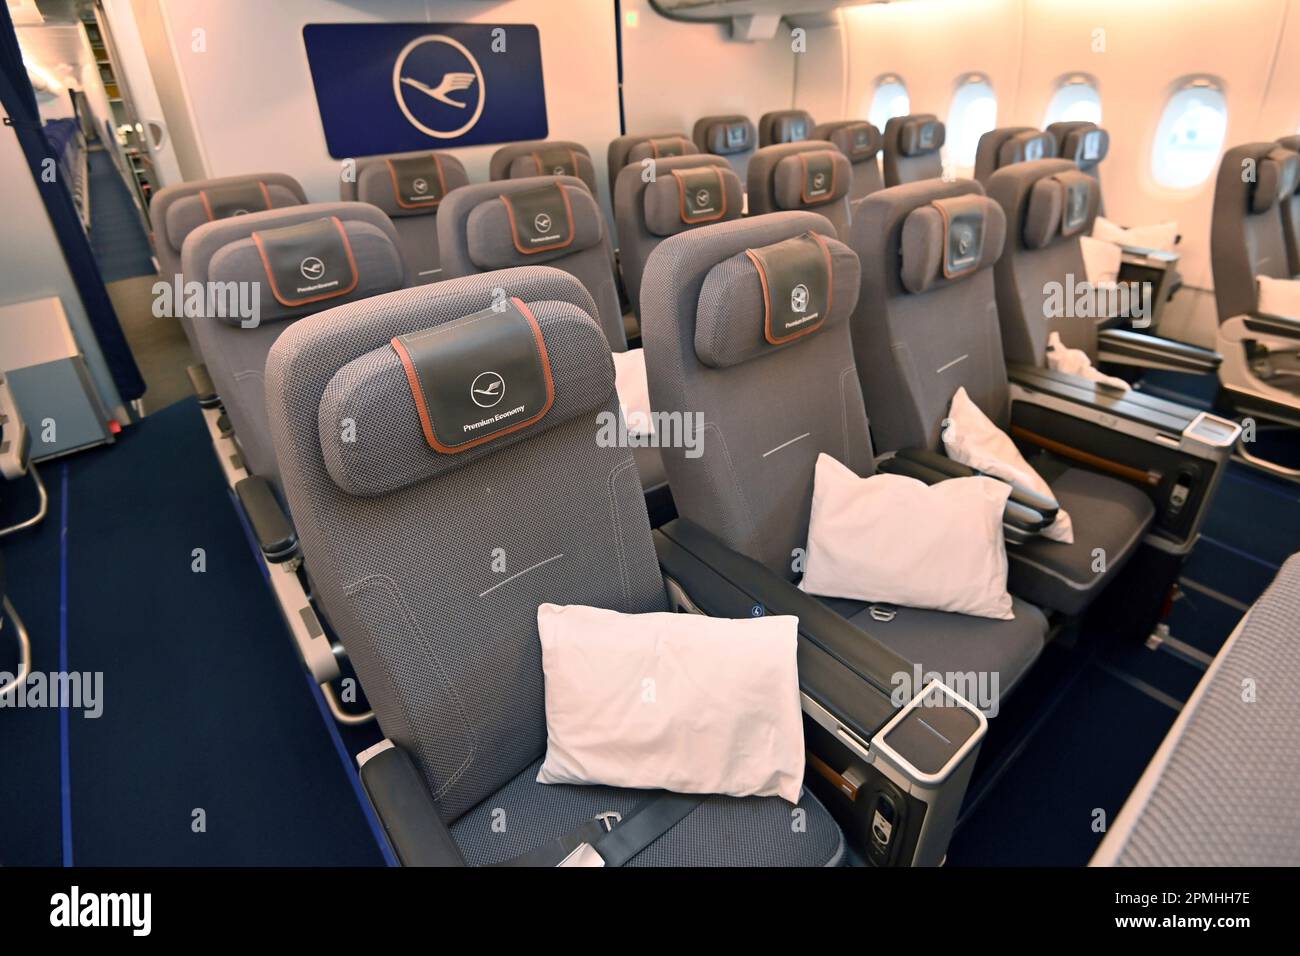 Lufthansa Airbus A380 long-haul aircraft will land again for the first time in Munich at Franz Josef Strauss Airport on April 12, 2023. Premium economy class, rows of seats, seats, seats, empty airplane cabin with no passengers. ? Stock Photo